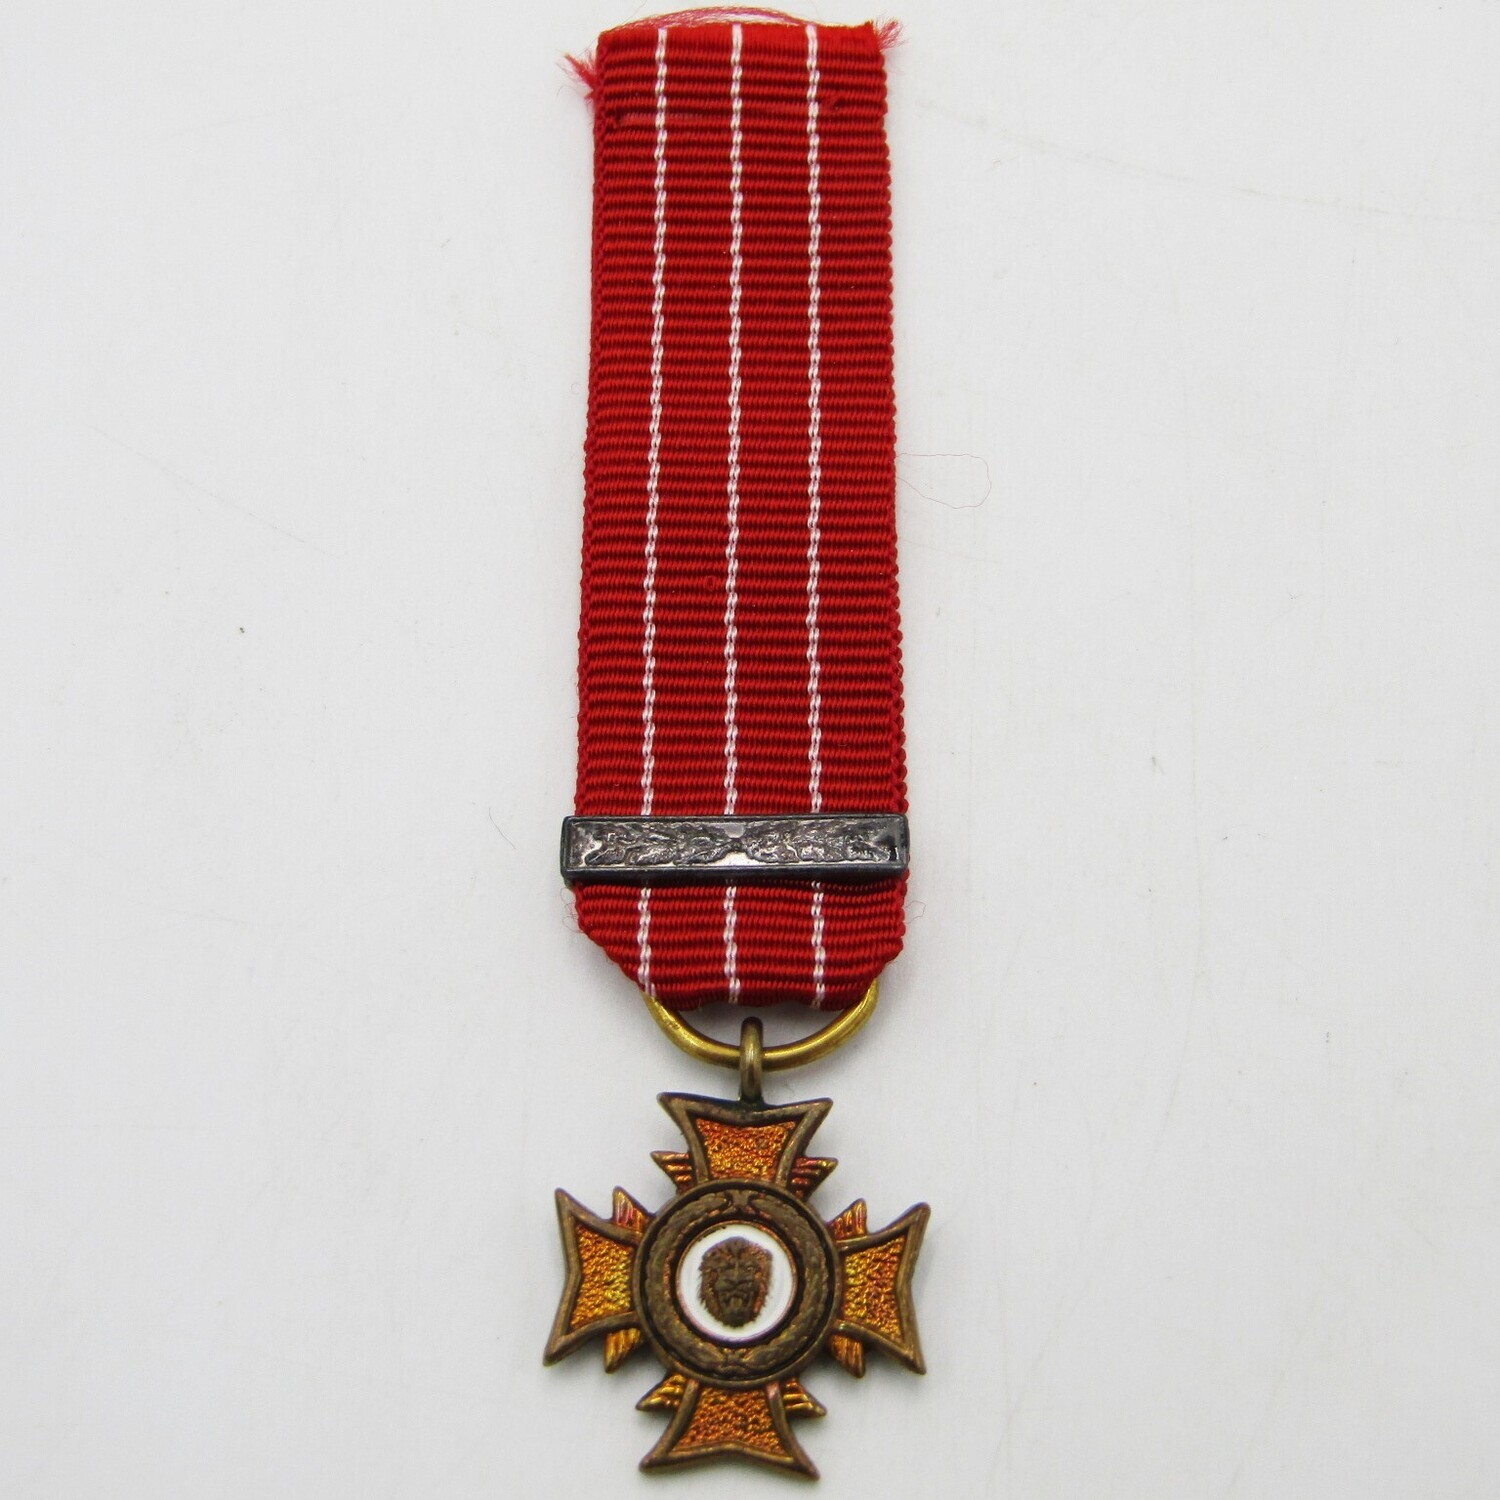 Rhodesia Conspicuous Gallantry decoration miniature medal - Livingston mint issue